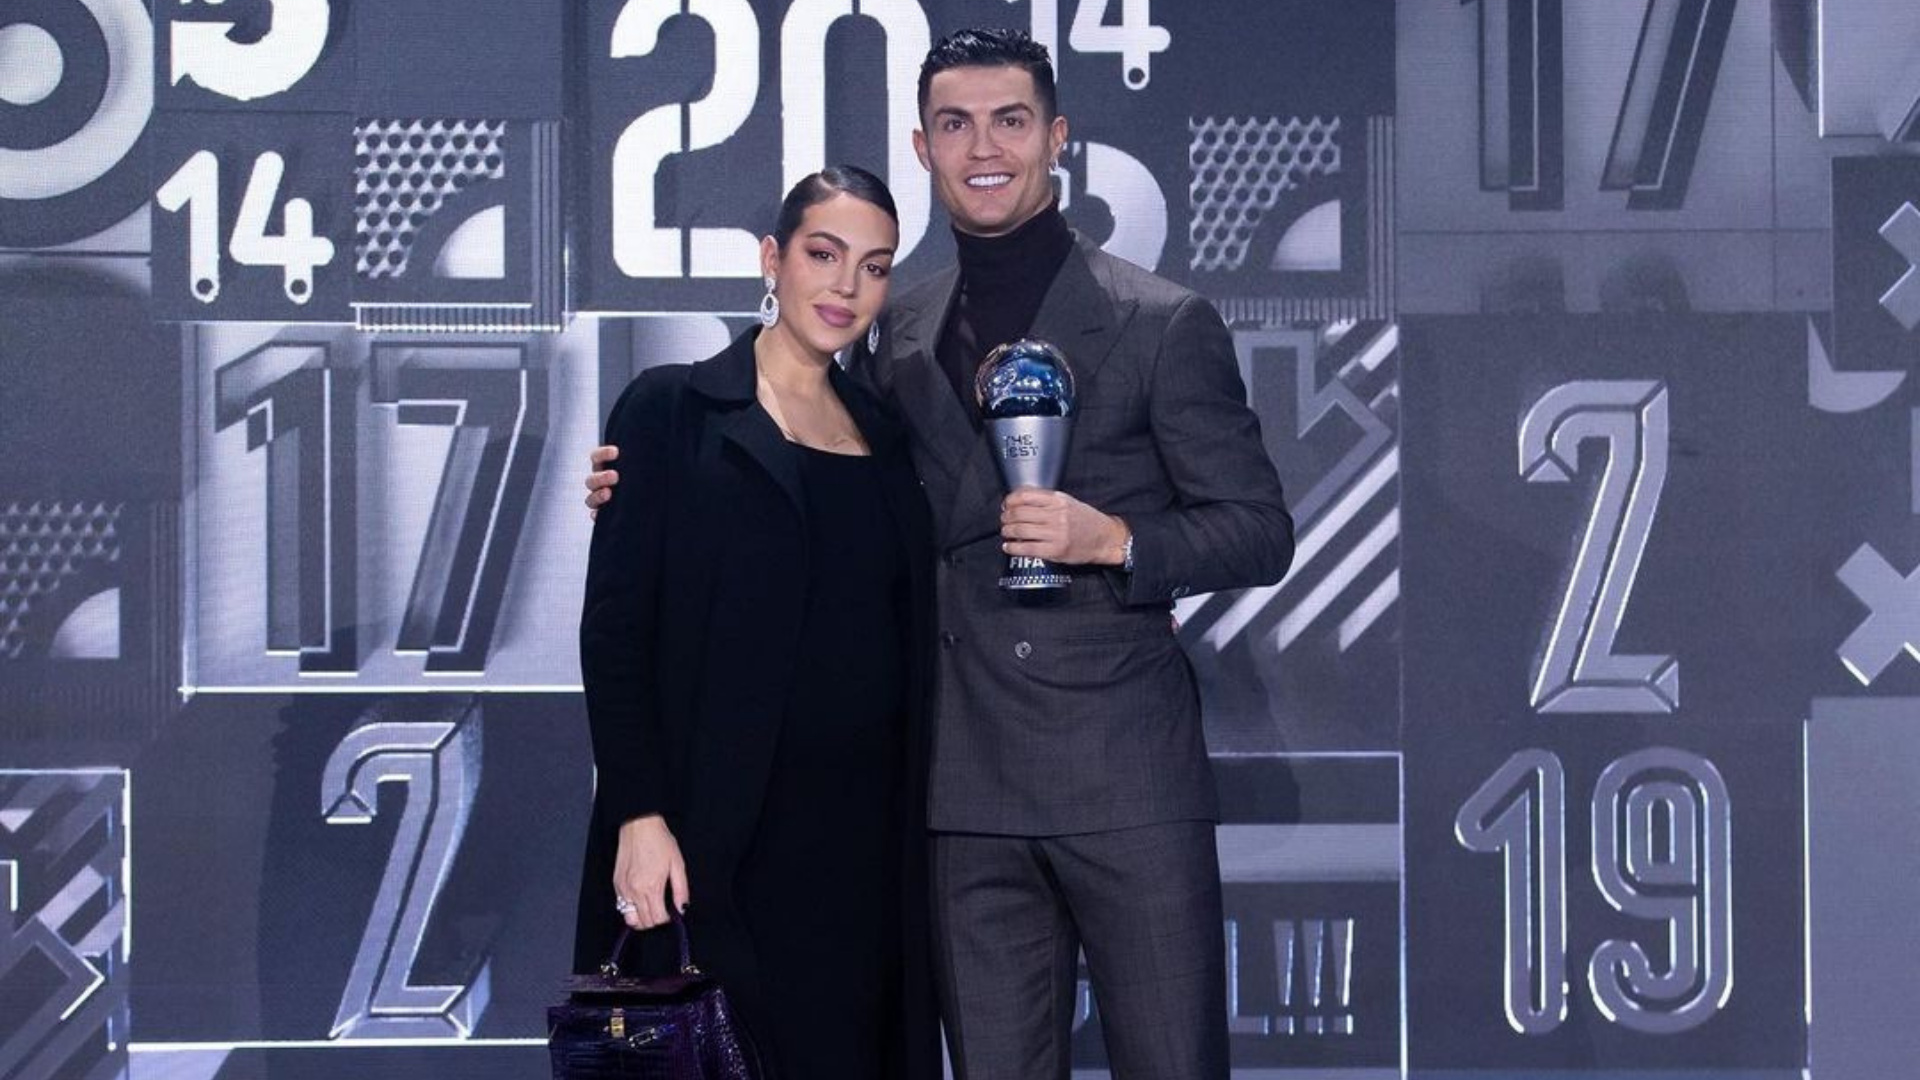 Cristiano Ronaldo and Georgina Rodriguez: The most prolific goalscorer in the history of the elite professional game. 1920x1080 Full HD Background.